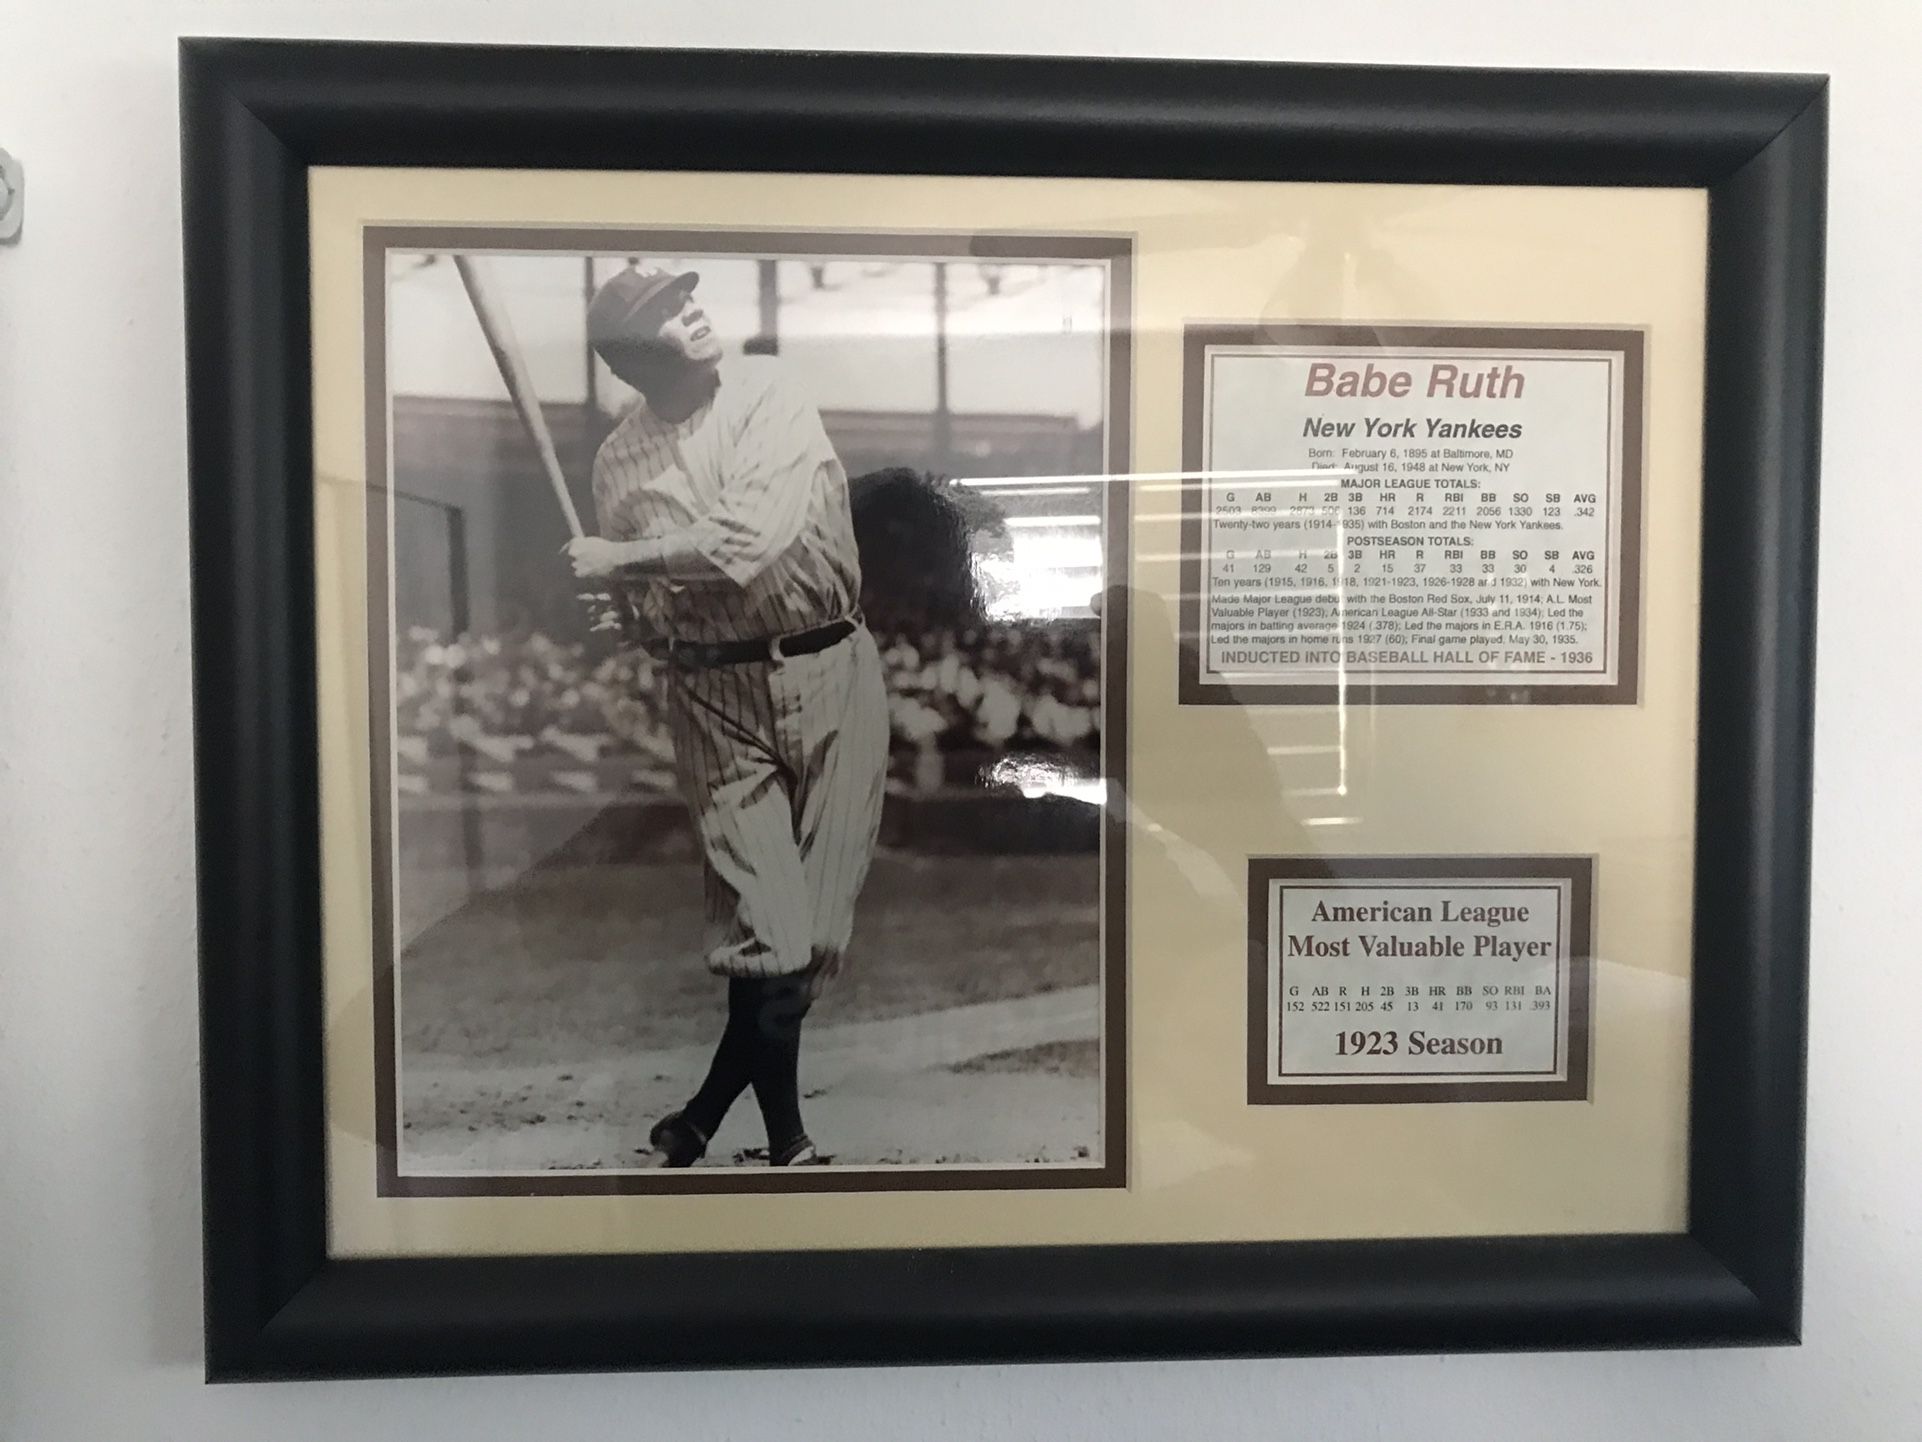 Collector Item Babe Ruth New York Yankees